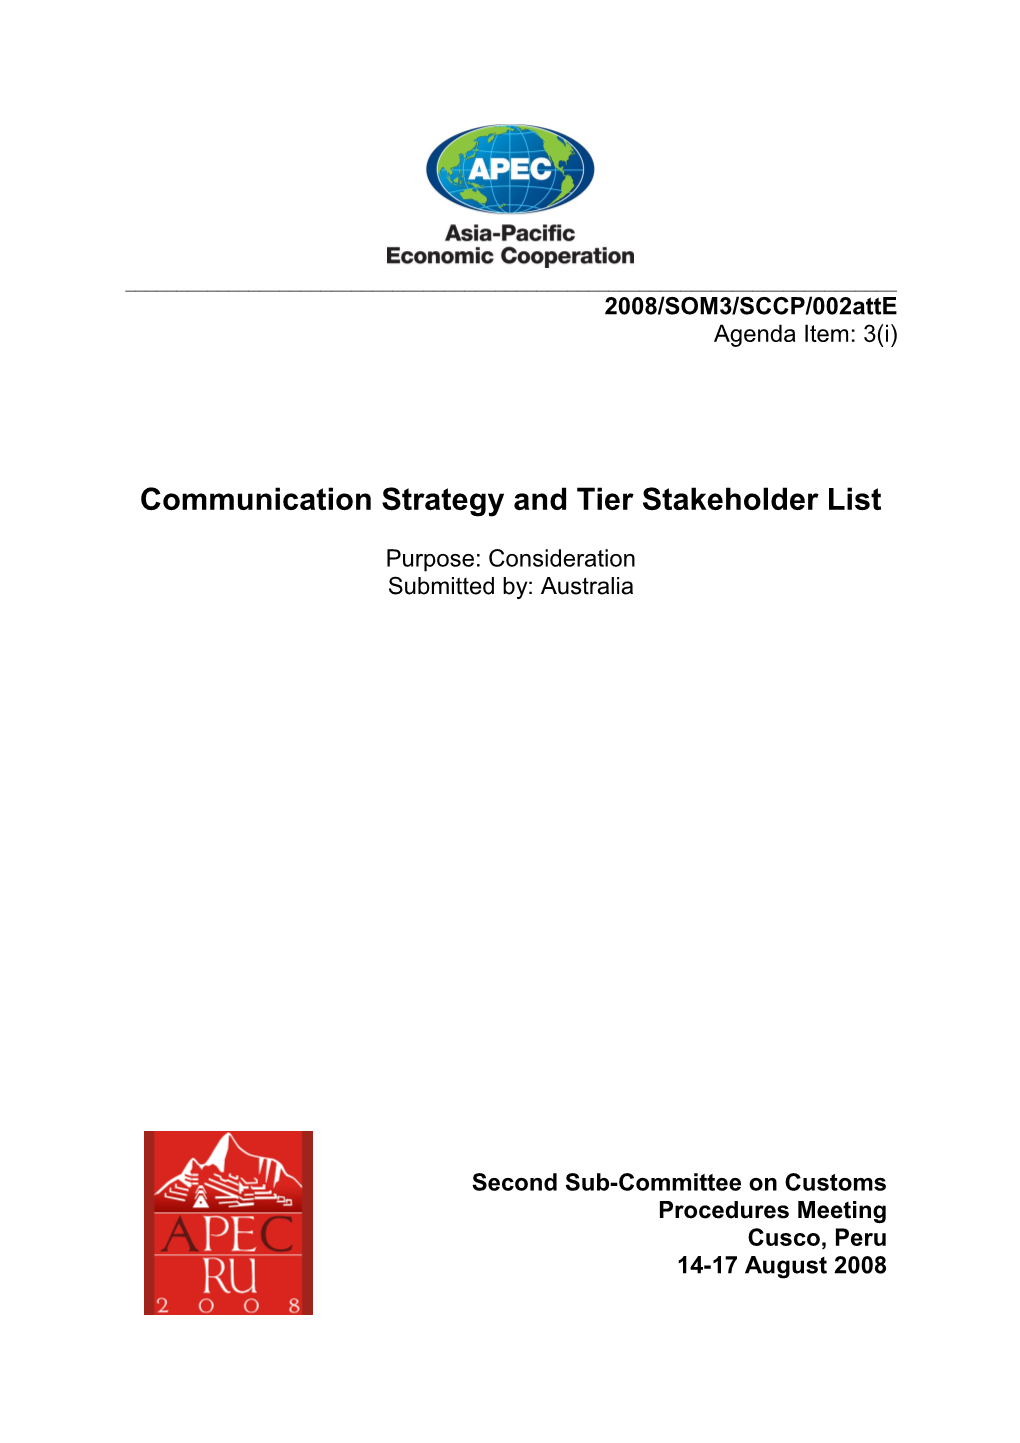 Communication Strategy and Tier Stakeholder List